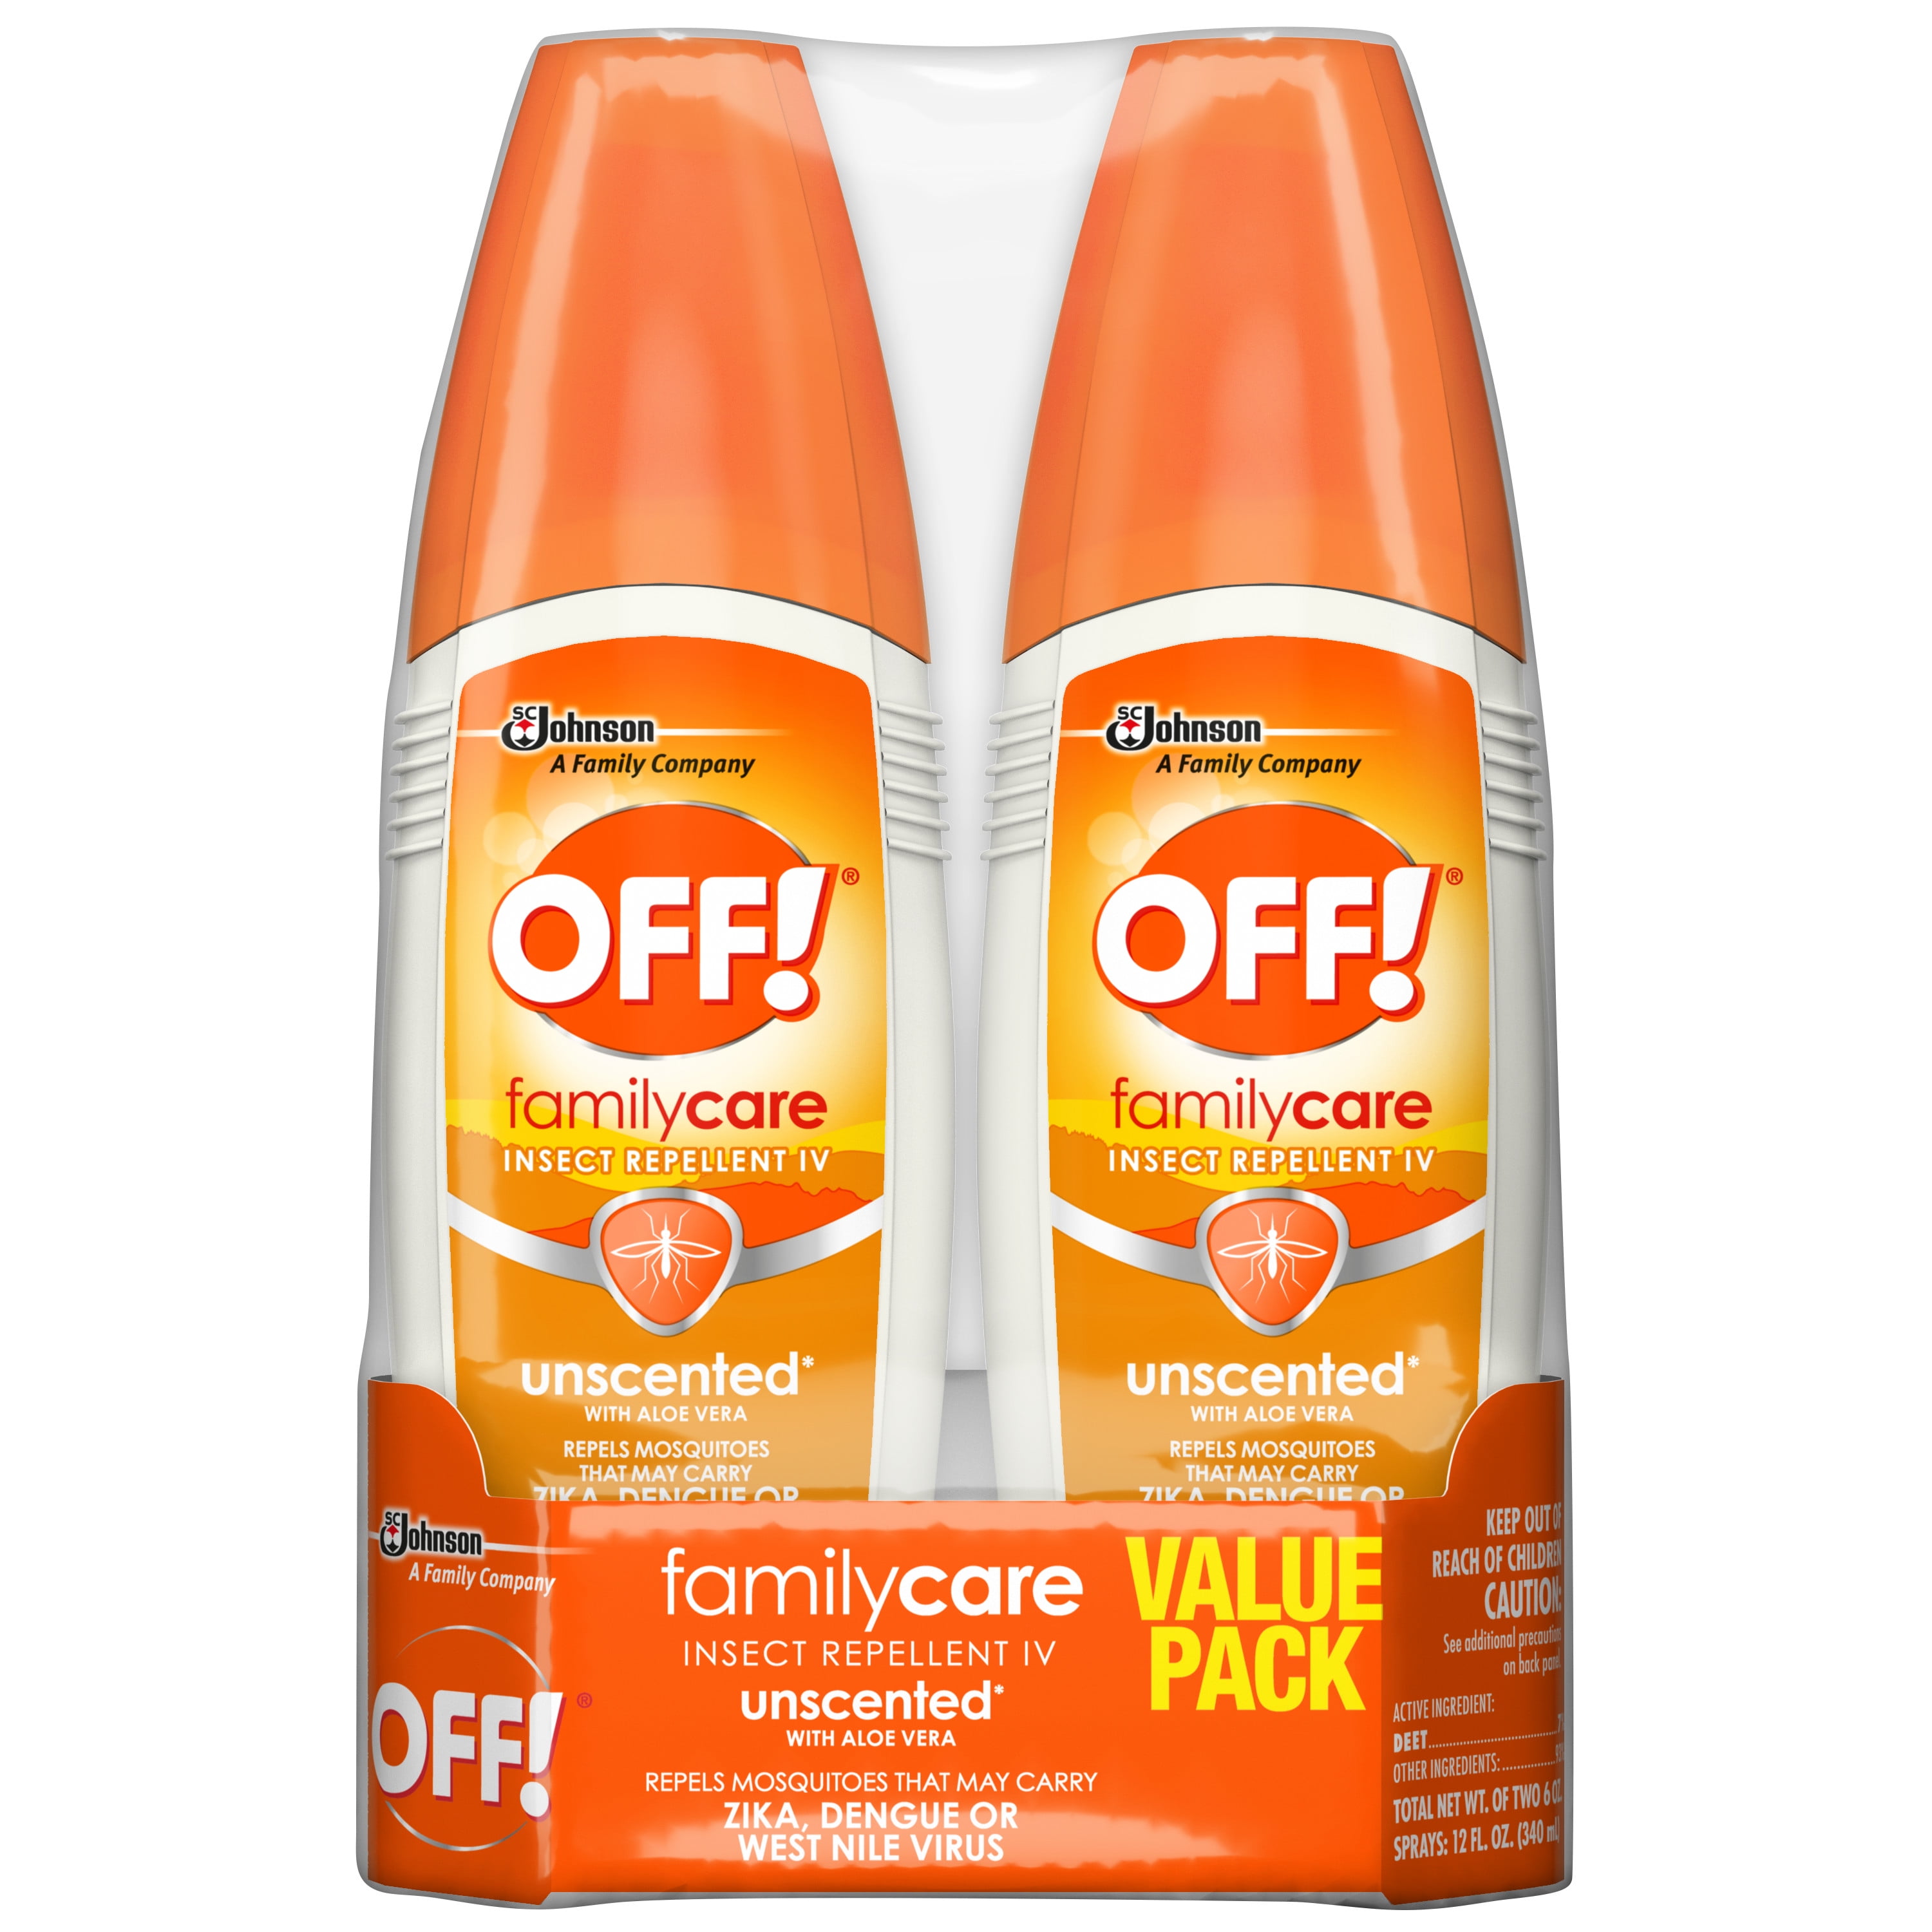 OFF! FamilyCare Insect Repellent IV, Unscented, 6 oz, 2 ct - Walmart